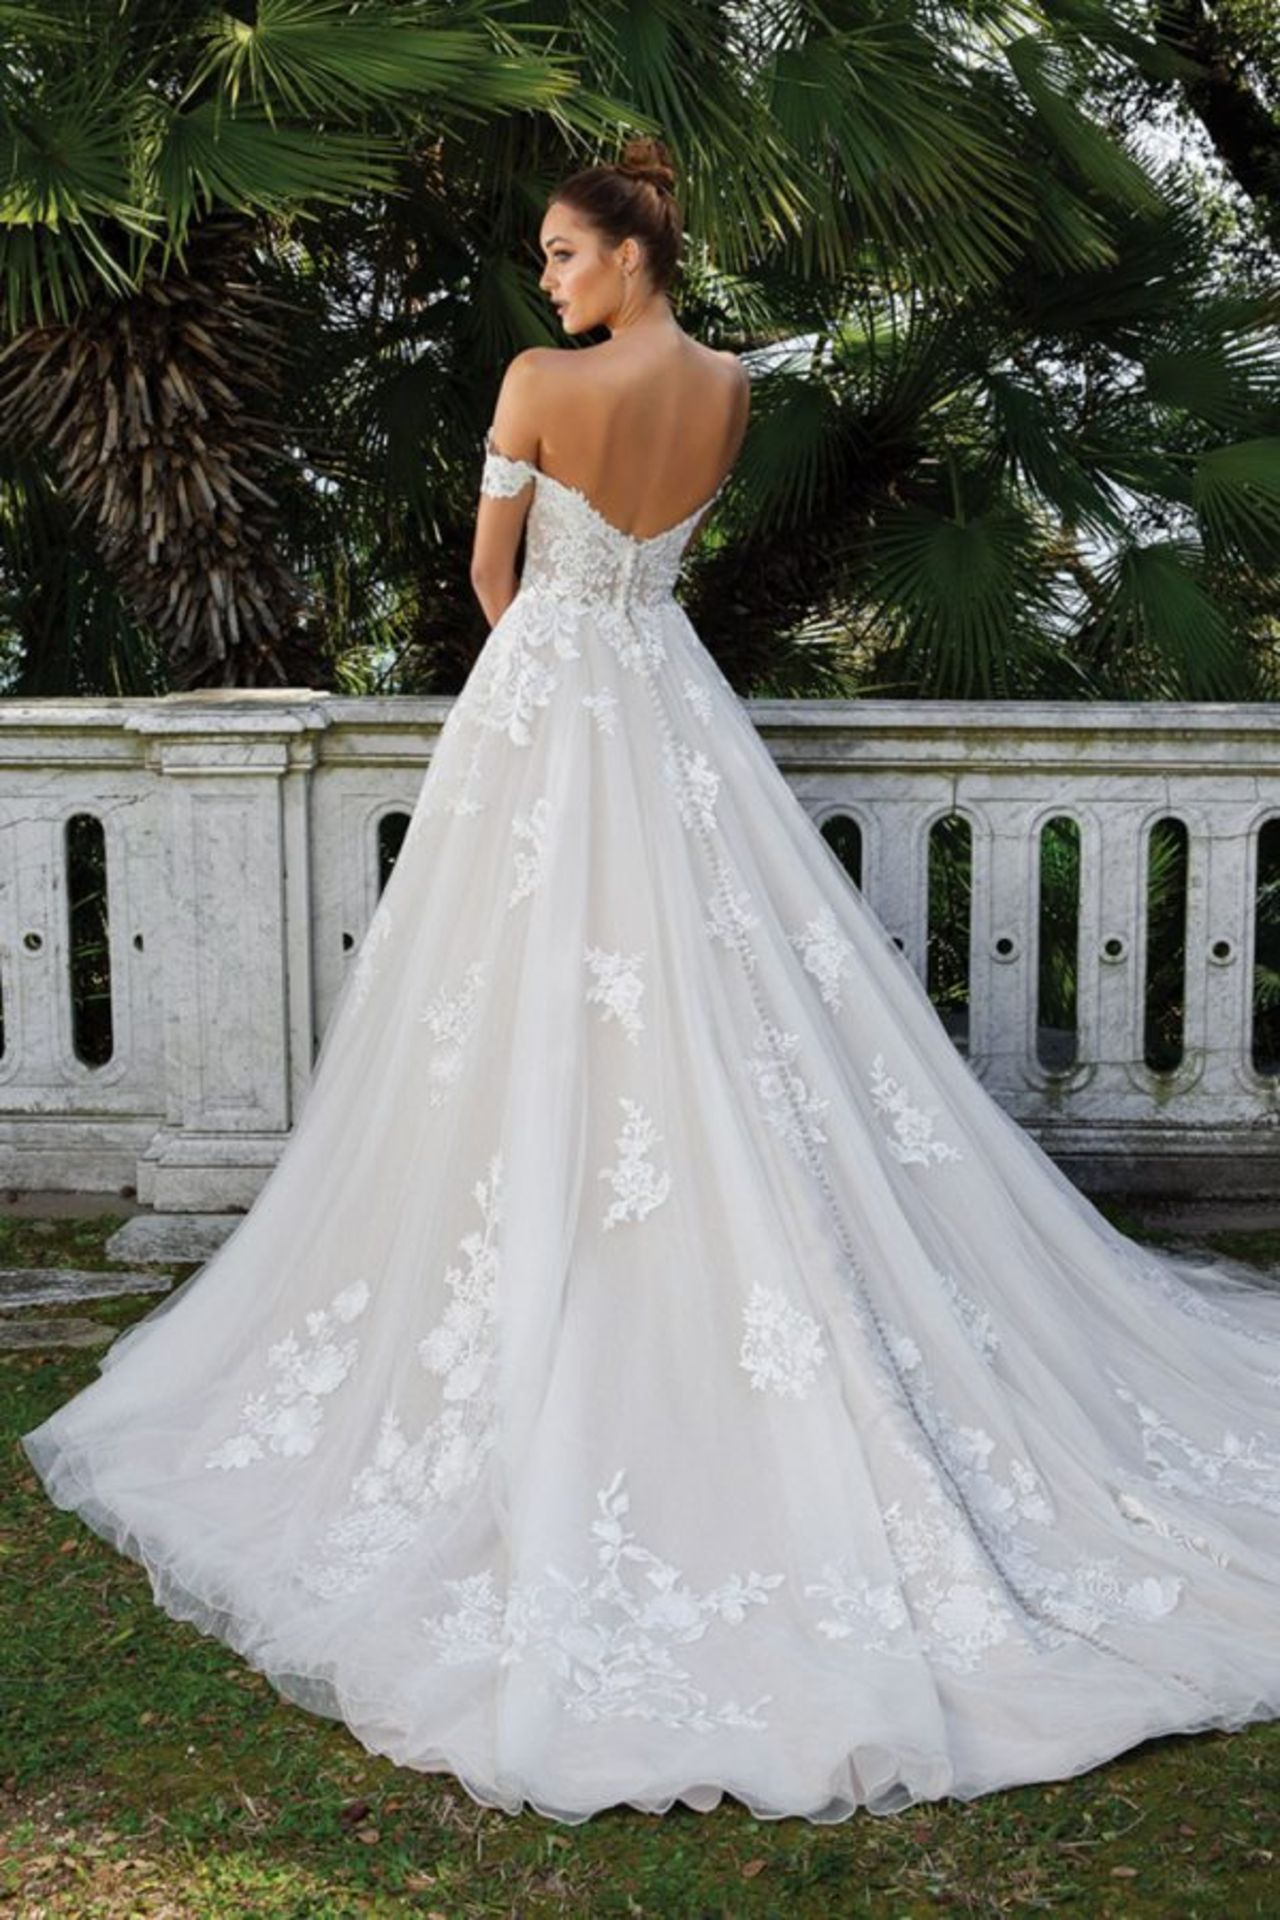 1 x Justin Alexander 'Venice' Tulle Ball Gown With Off the Shoulder Detail - UK Size 10 - RRP £1,854 - Image 15 of 15